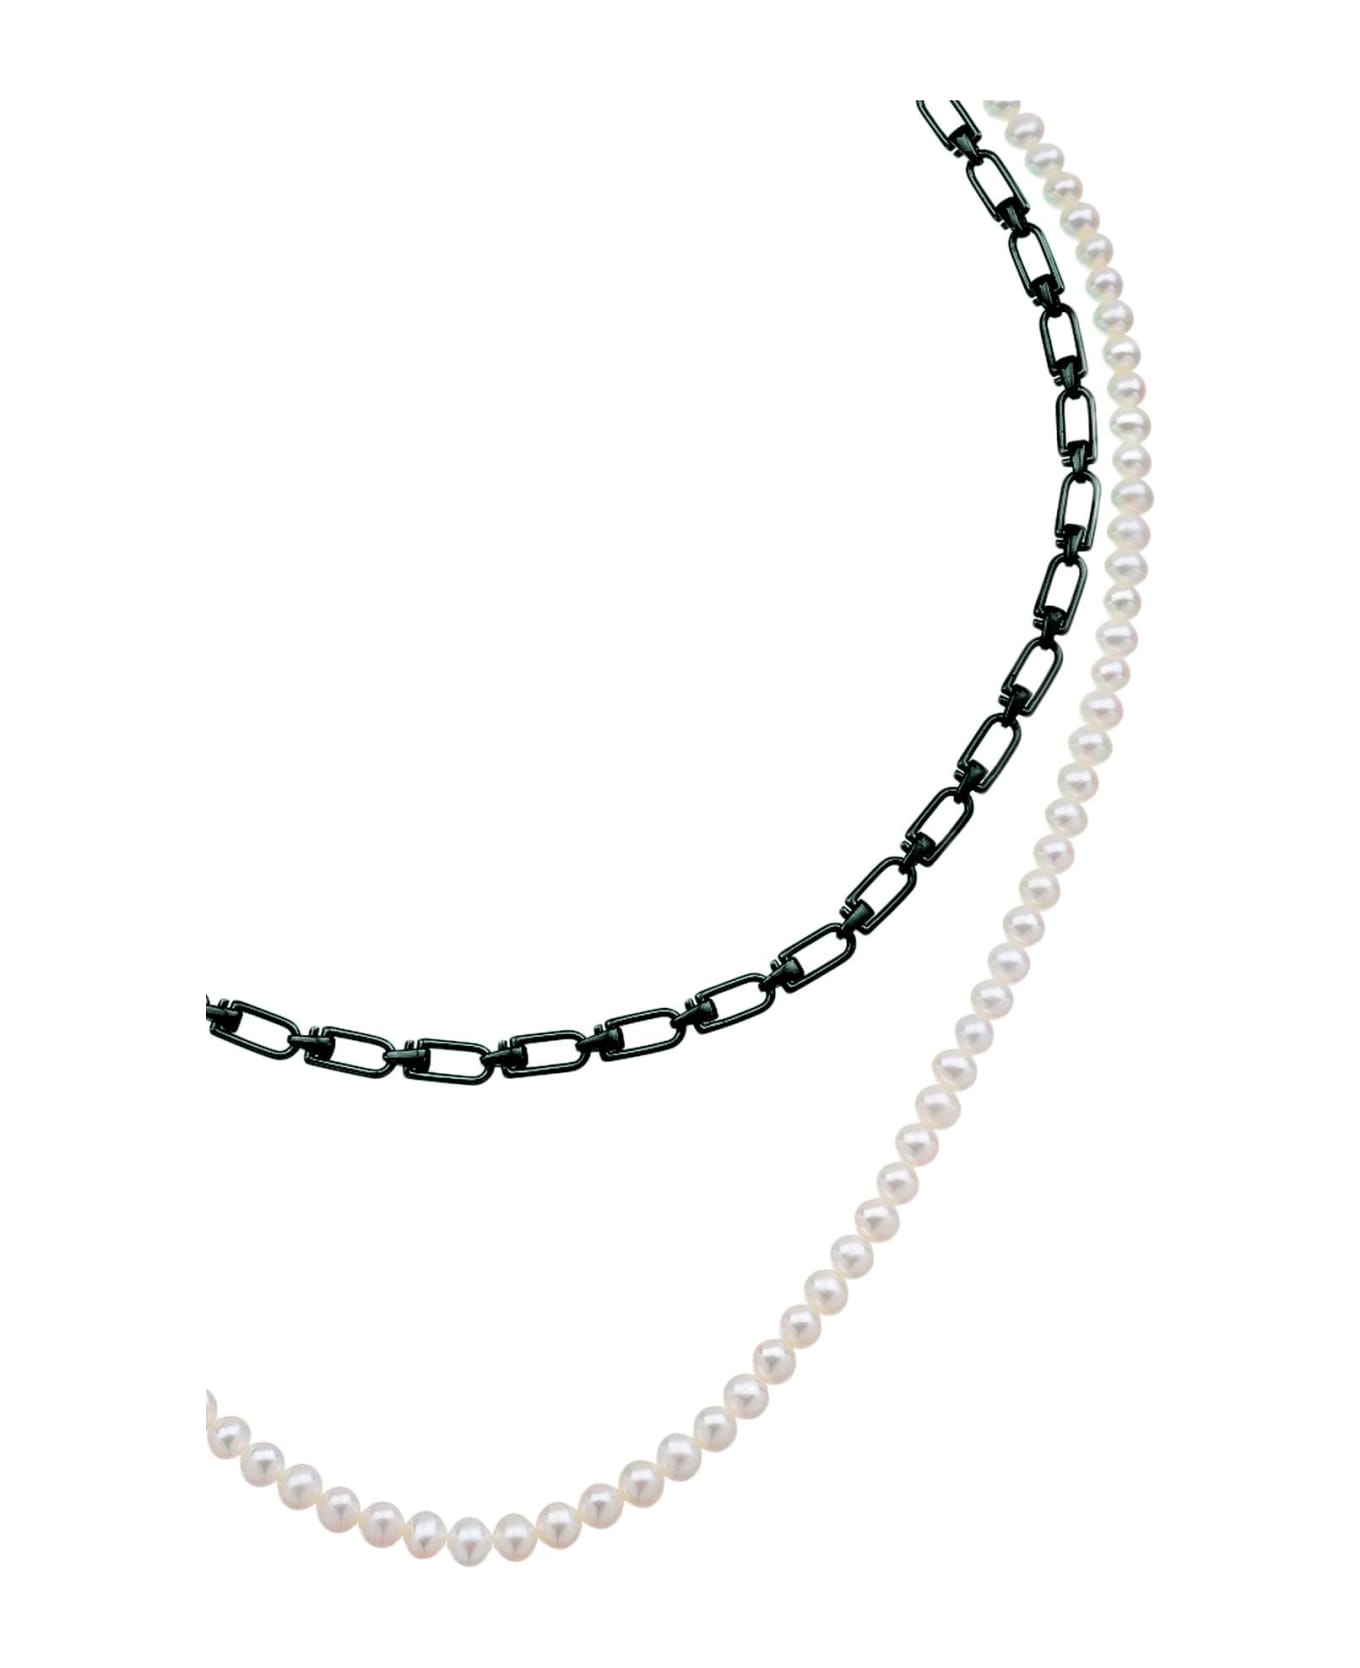 EÉRA 'reine' Double Necklace With Pearls - SILVER BLACK (White)